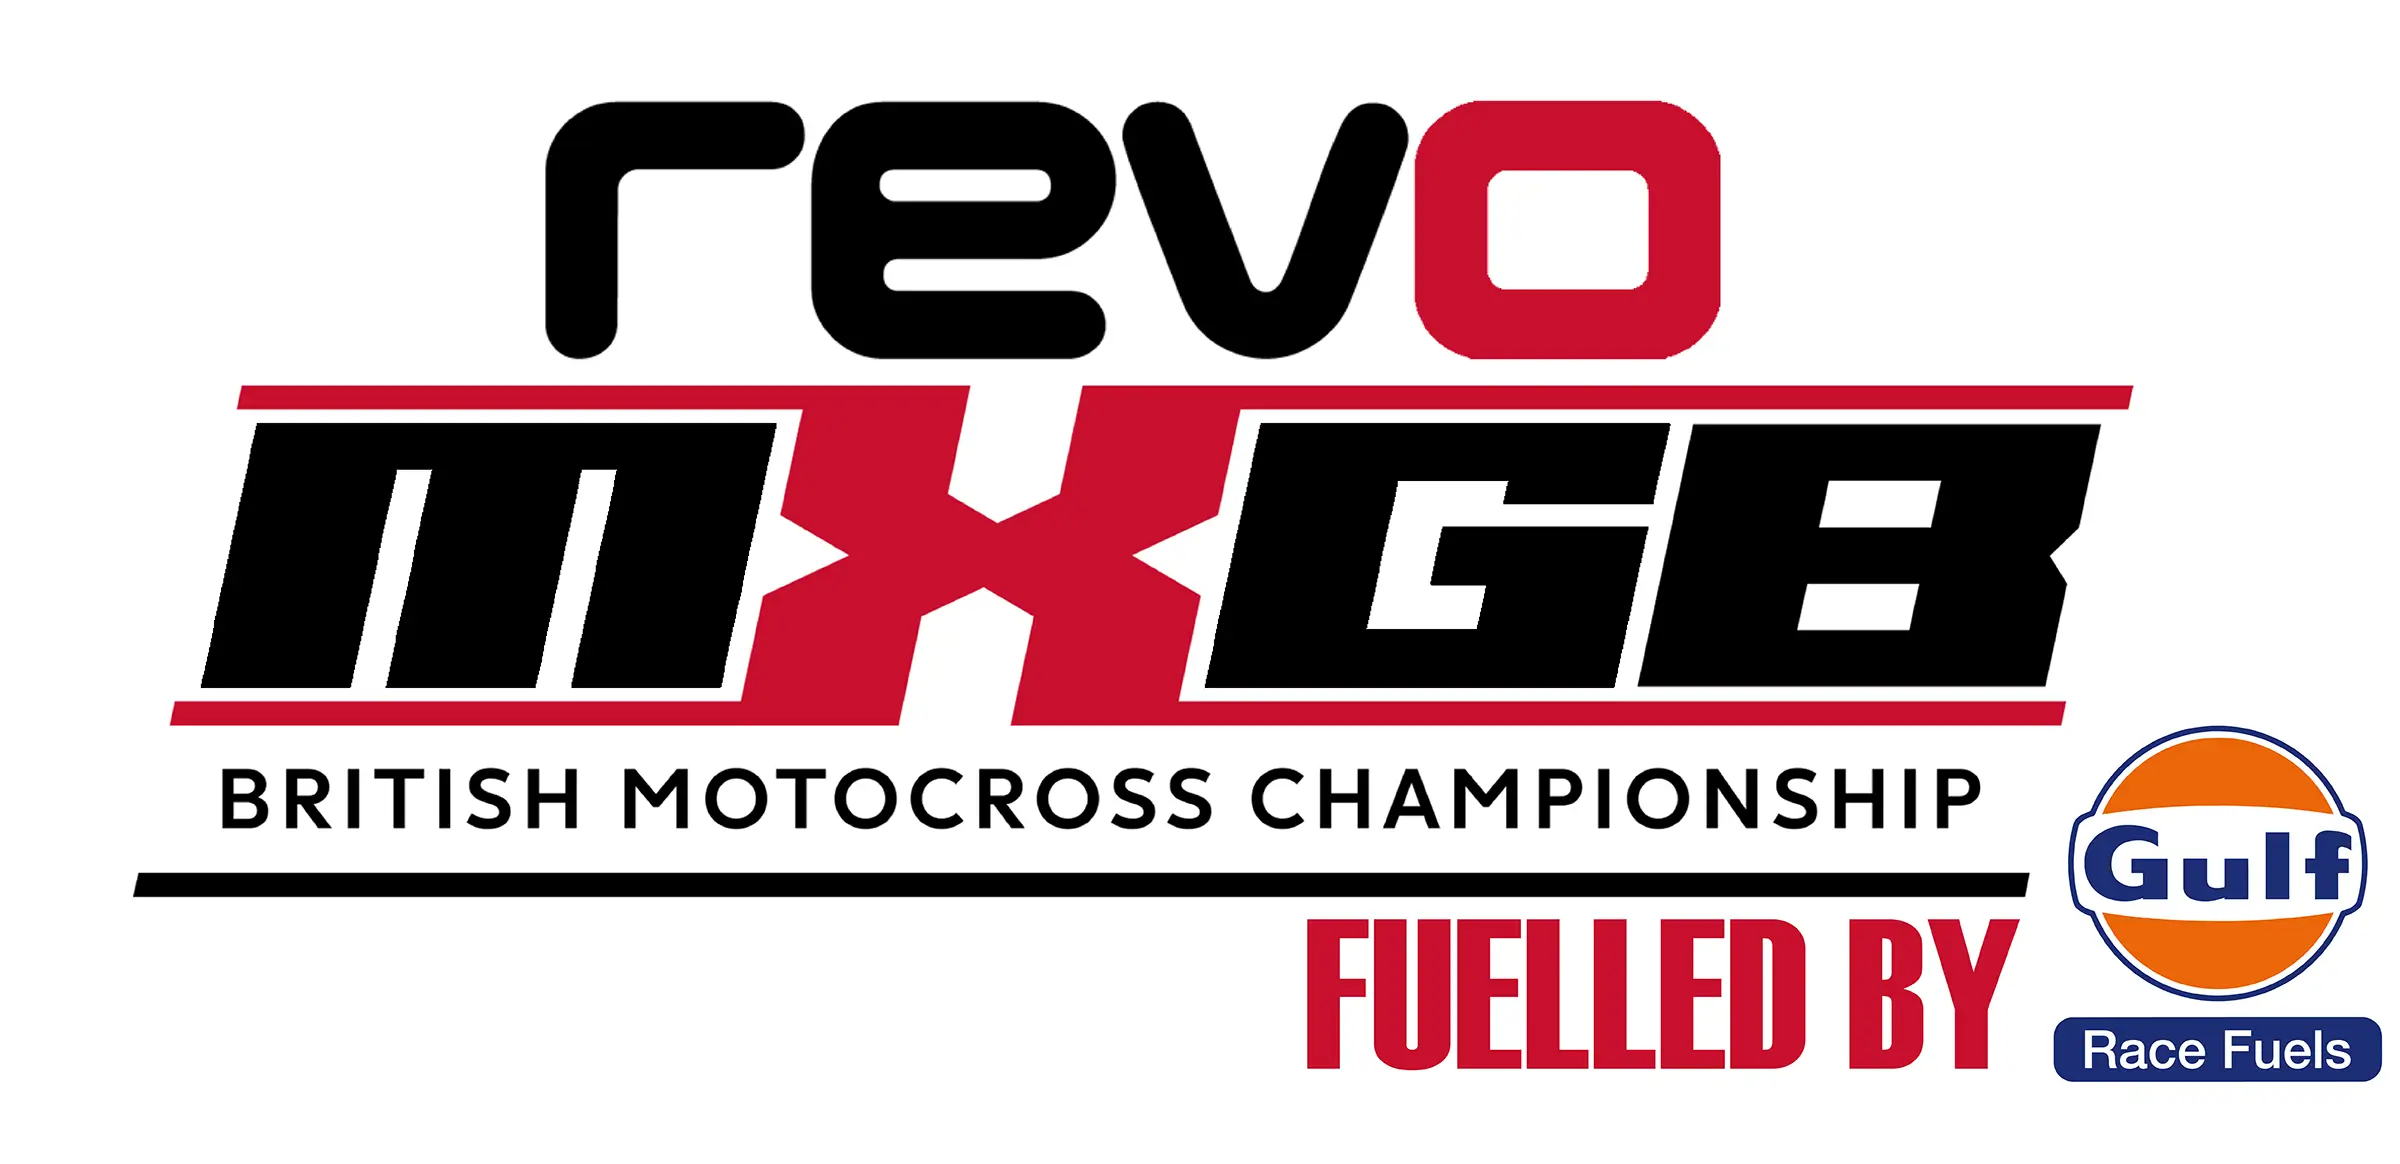 Gulf Race Fuels announced as new British Motocross Championship ‘Fuelled By’ sponsor